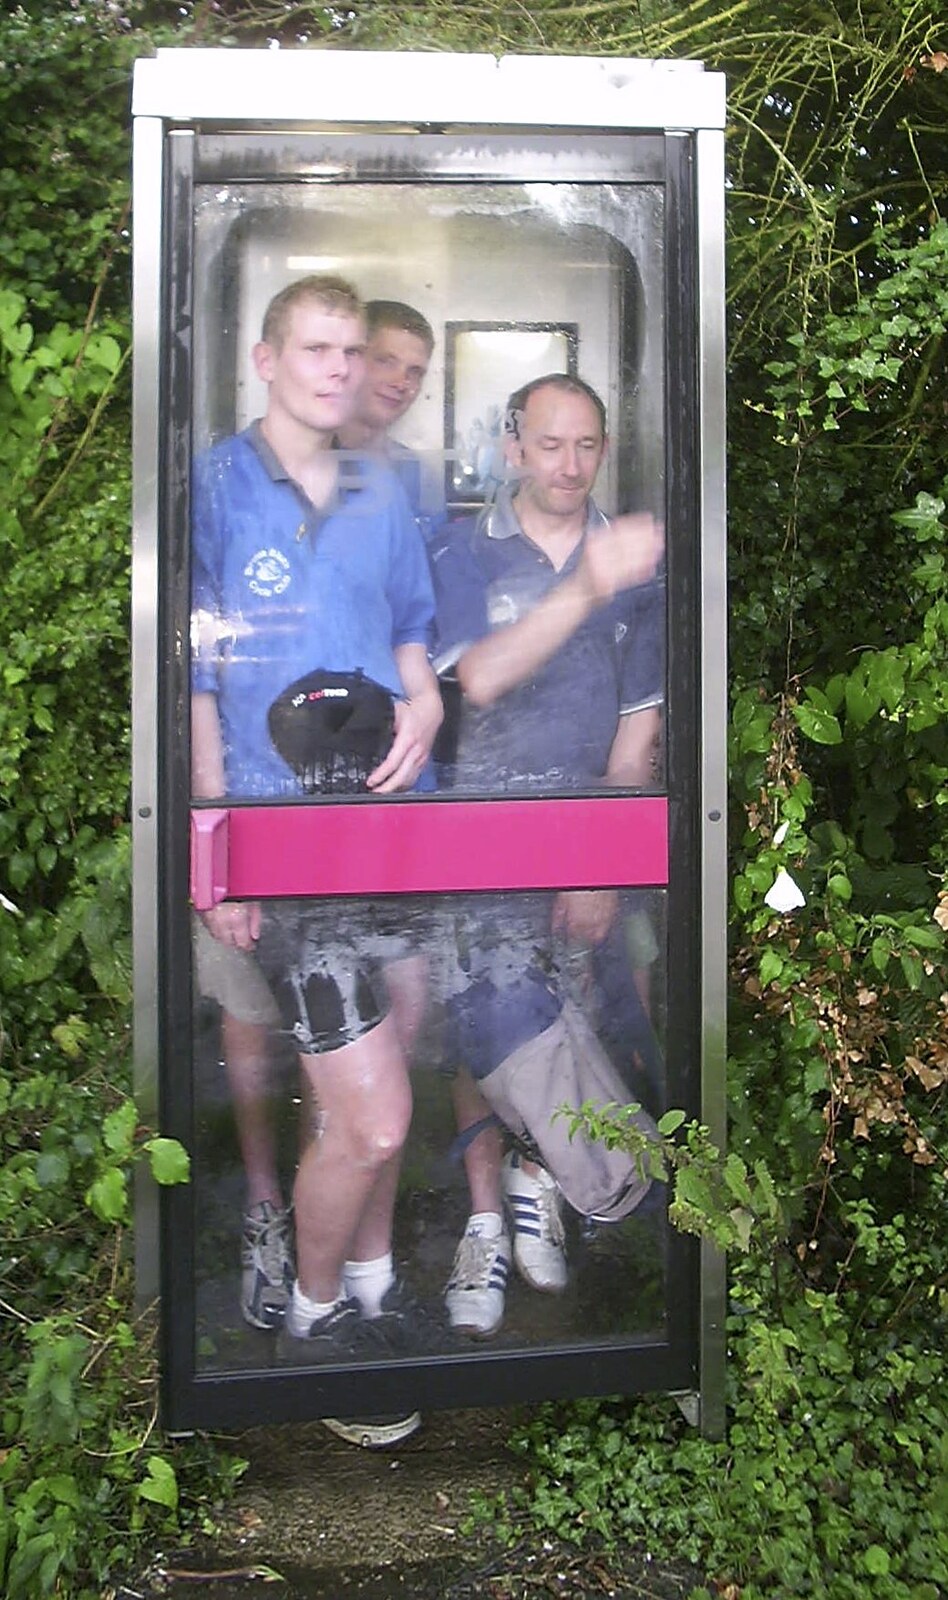 The BSCC Annual Sponsored Bike Ride, The Cottage, Thorpe St. Andrew, Norwich  - 18th July 2004: Bill, Phil and DH in a Thelveton phonebox